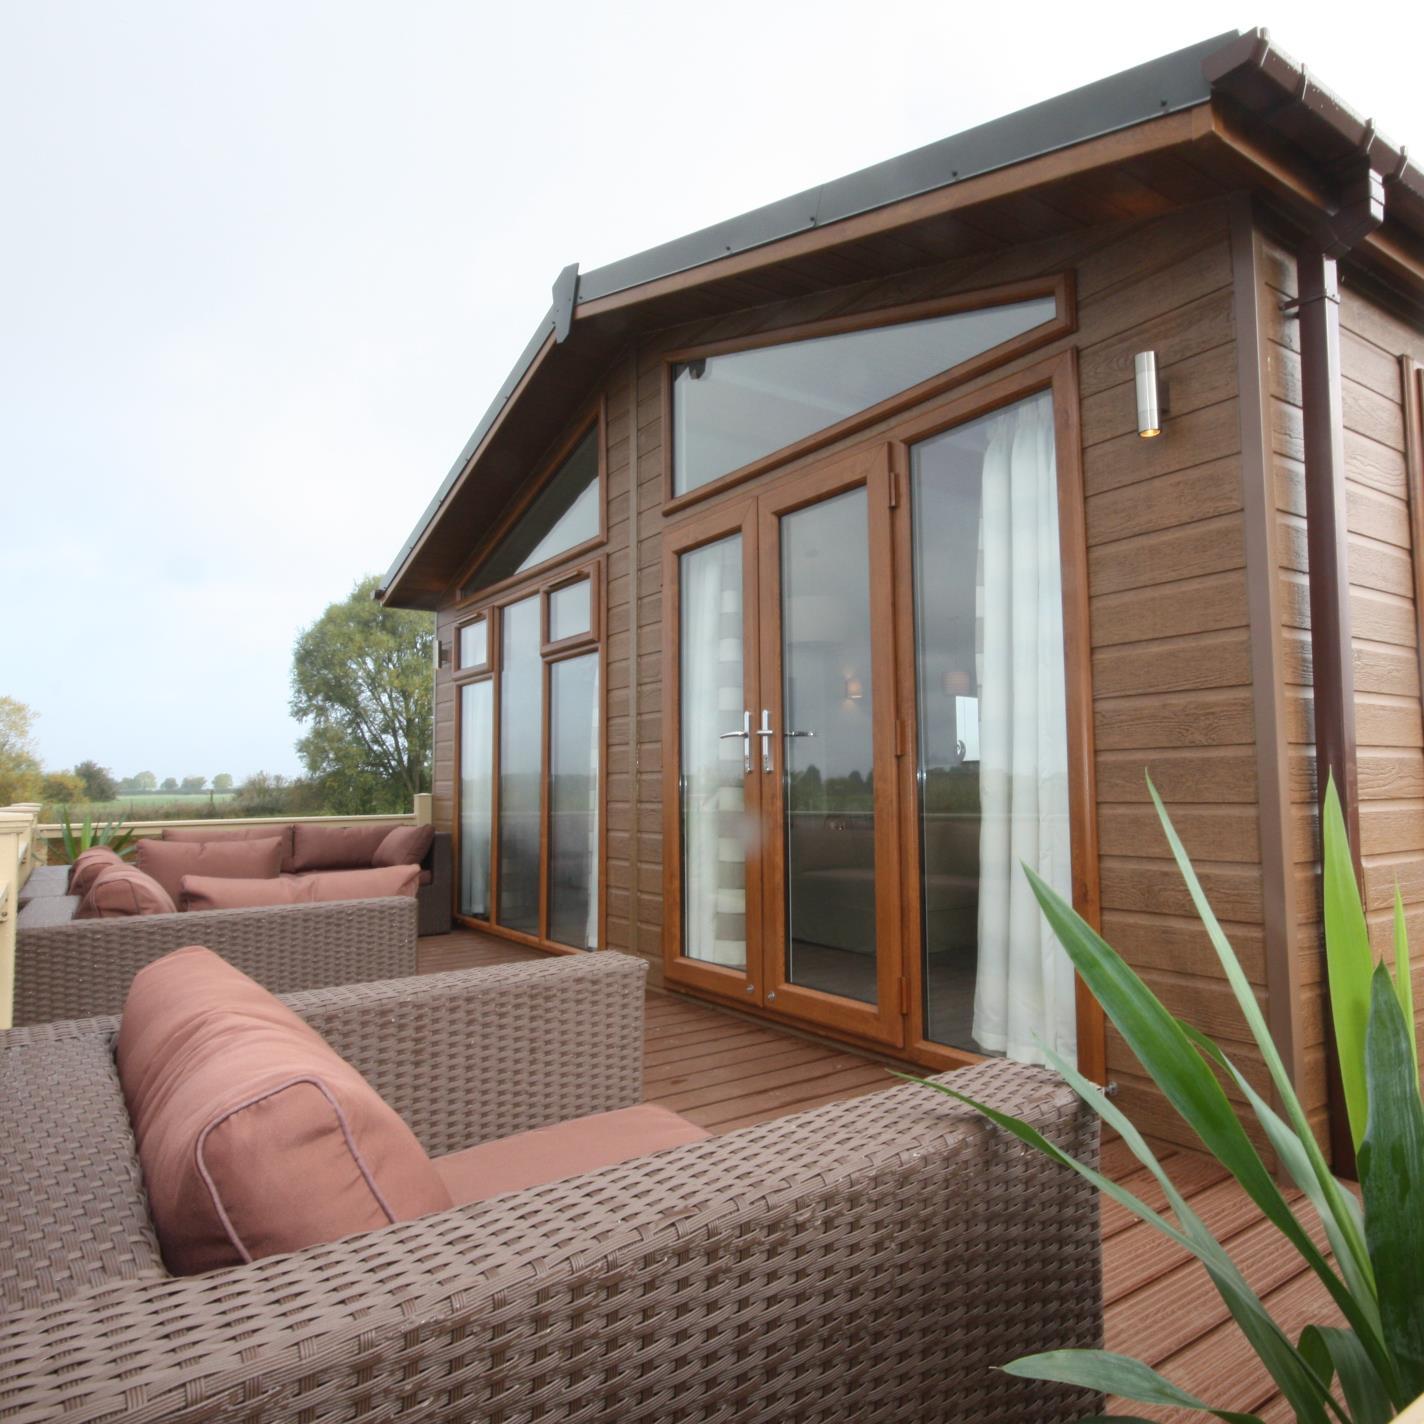 Barlings Country Holiday Park is set in over 22 acres of secure countryside. Offering a touring site,fishing lakes and the Retreat  luxury lodge development